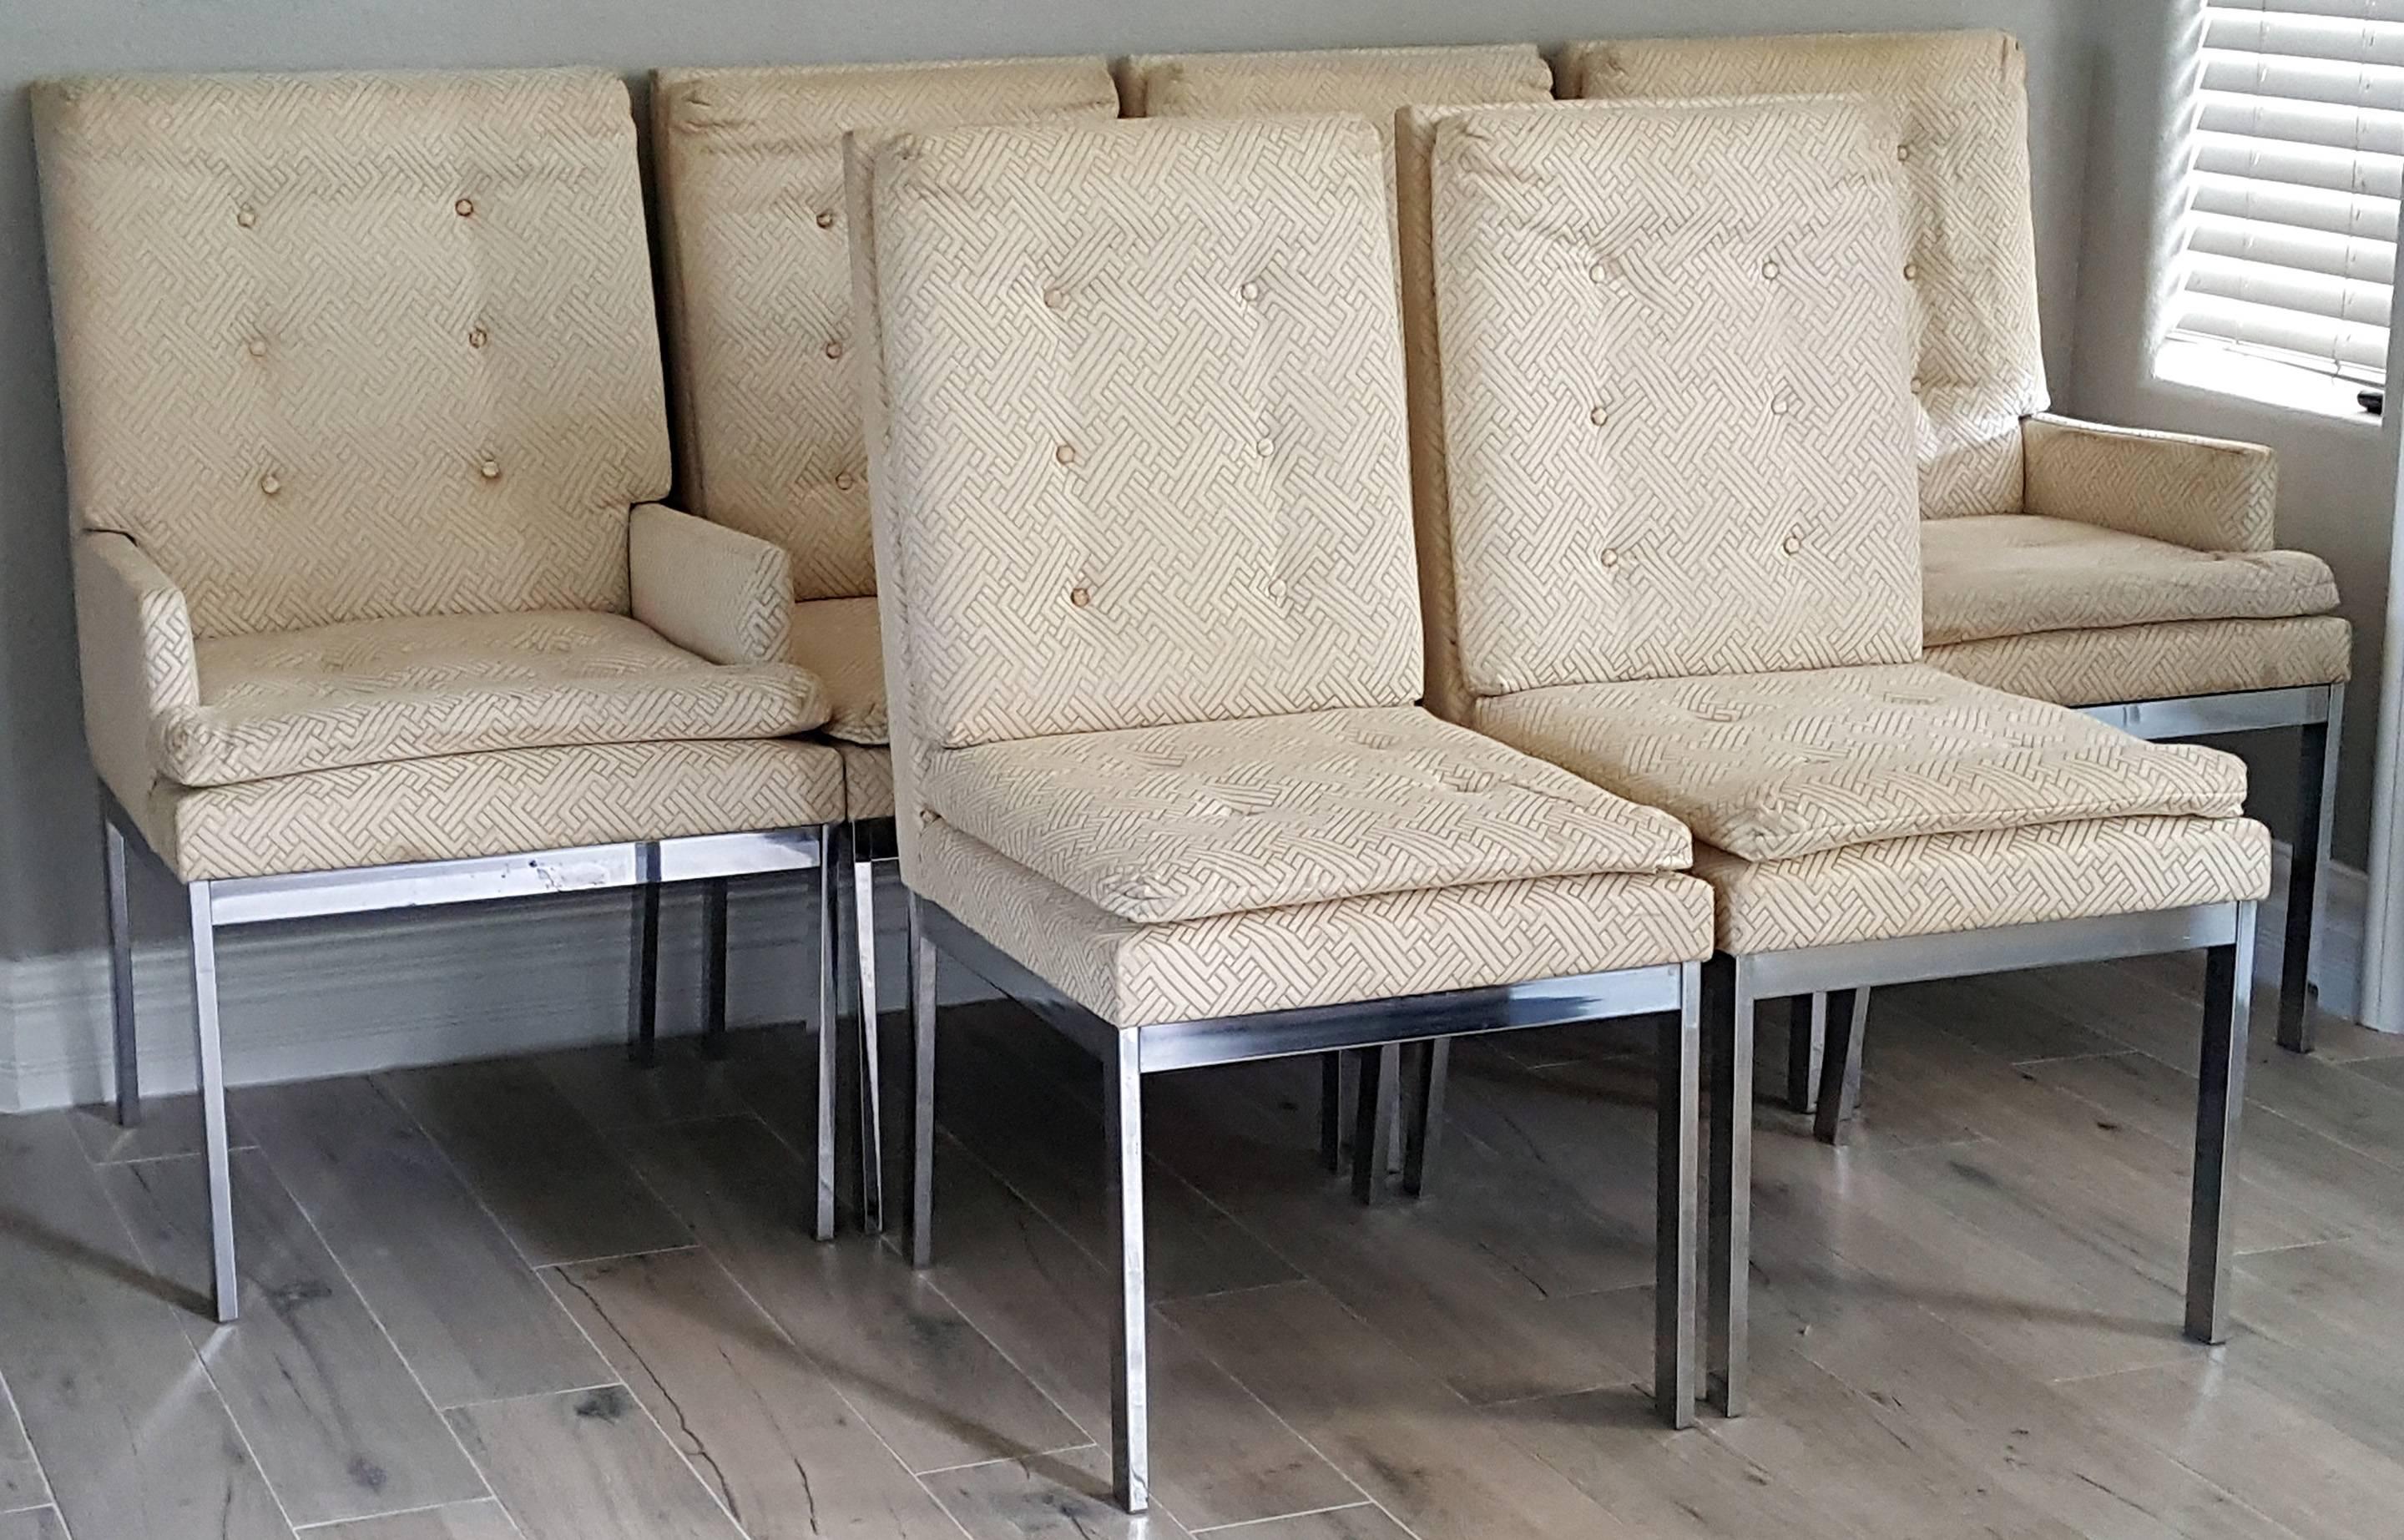 A set of six Milo Baughman for Design Institute of America chrome frame dining chairs, all with original tags and fabric. The set features two armchairs, as well as four matching side chairs.

The frames of the chairs are in excellent condition